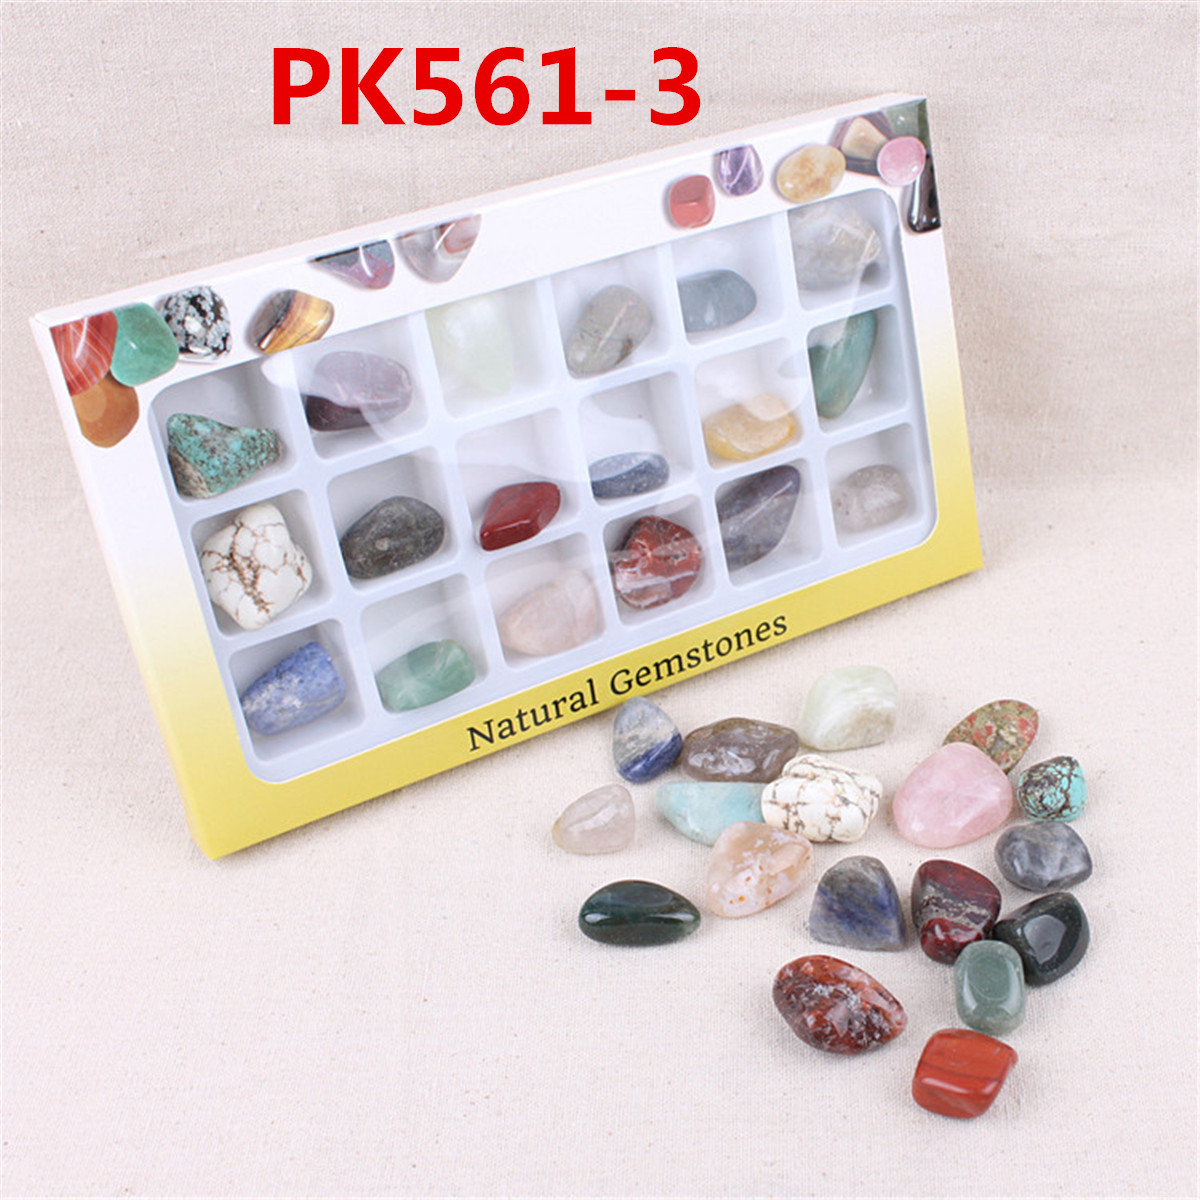 AU Natural Gemstones Stones Variety Collection Crystals Kit Mineral Geological Teaching Materials 11